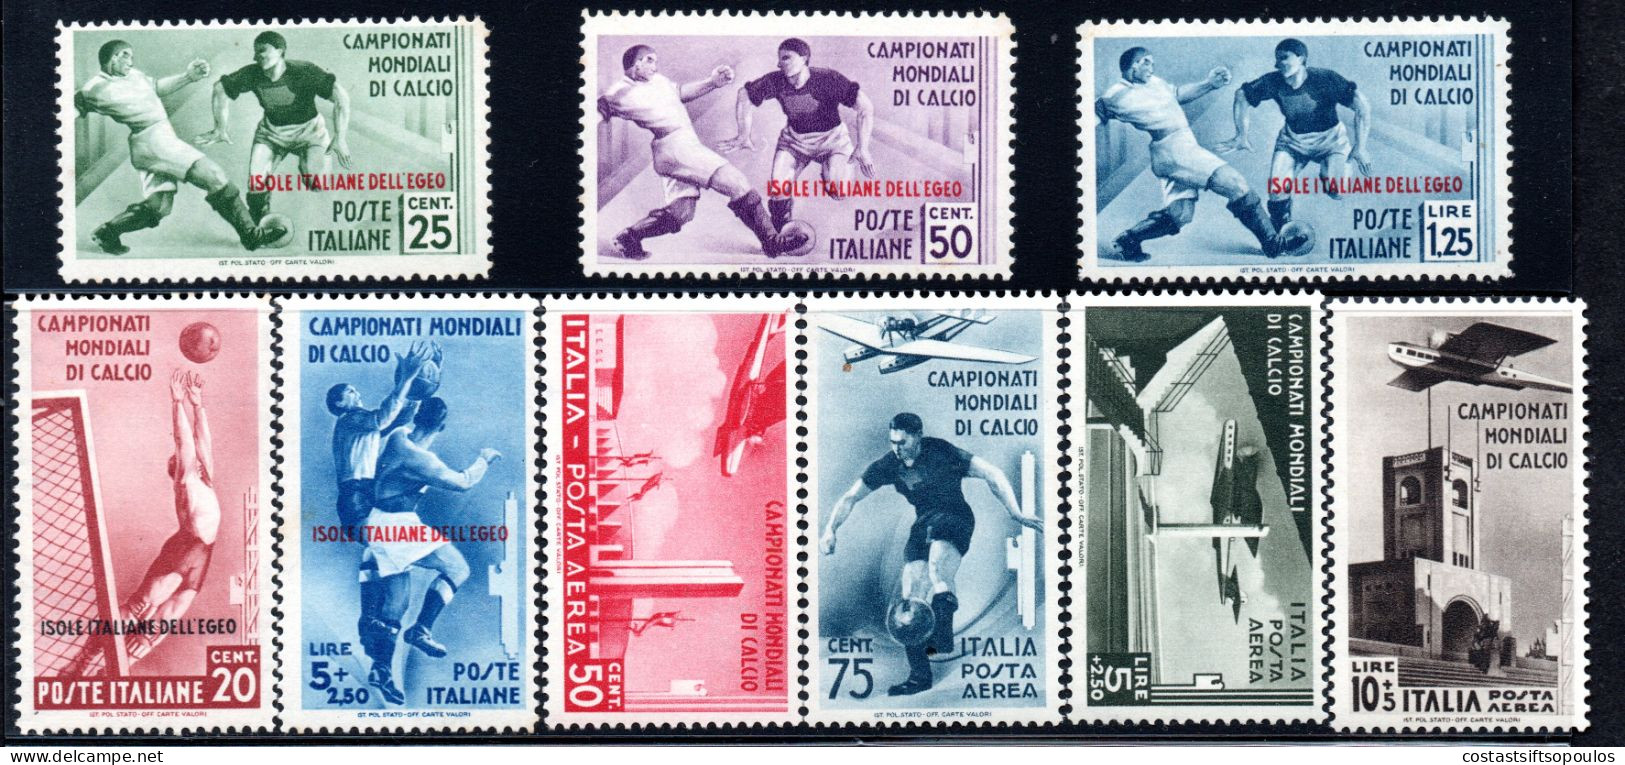 2786. -5.GREECE,ITALY,DODECANESE,1934 SOCCER,FOOTBALL,SC.31-35, C28-C31MNH.LIGHT GUM BLEMISHES, SEE SCAN. - Dodecanese